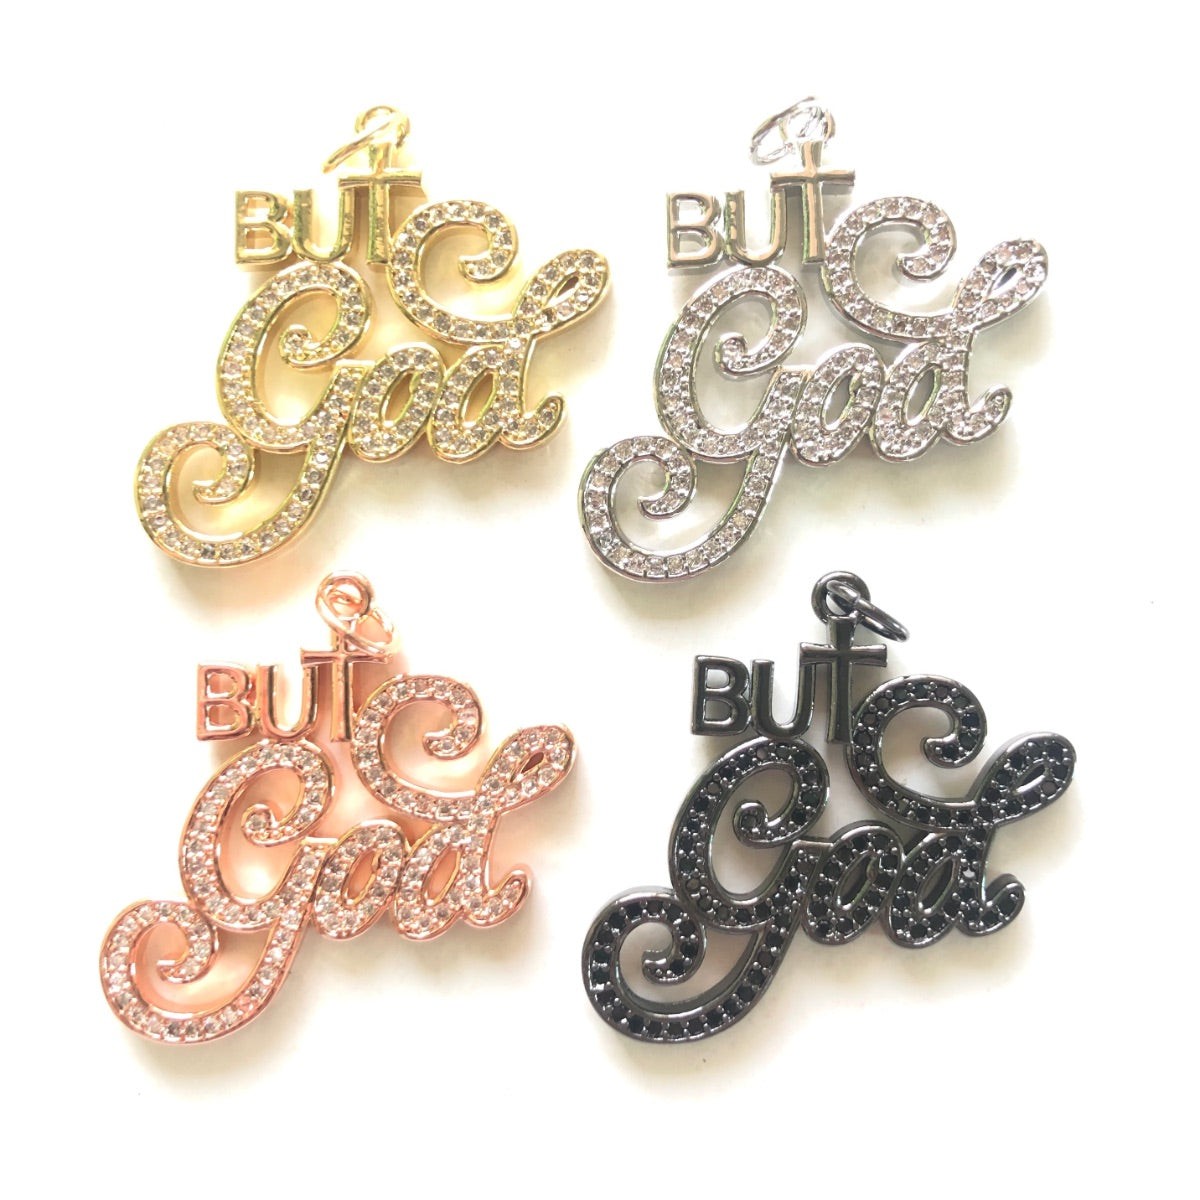 Gold Number Charms, CZ Pave Number Charms, Mini Tiny Charms 9-10mm Tall,  Anniversary Birthday Number Beads GB-1652 